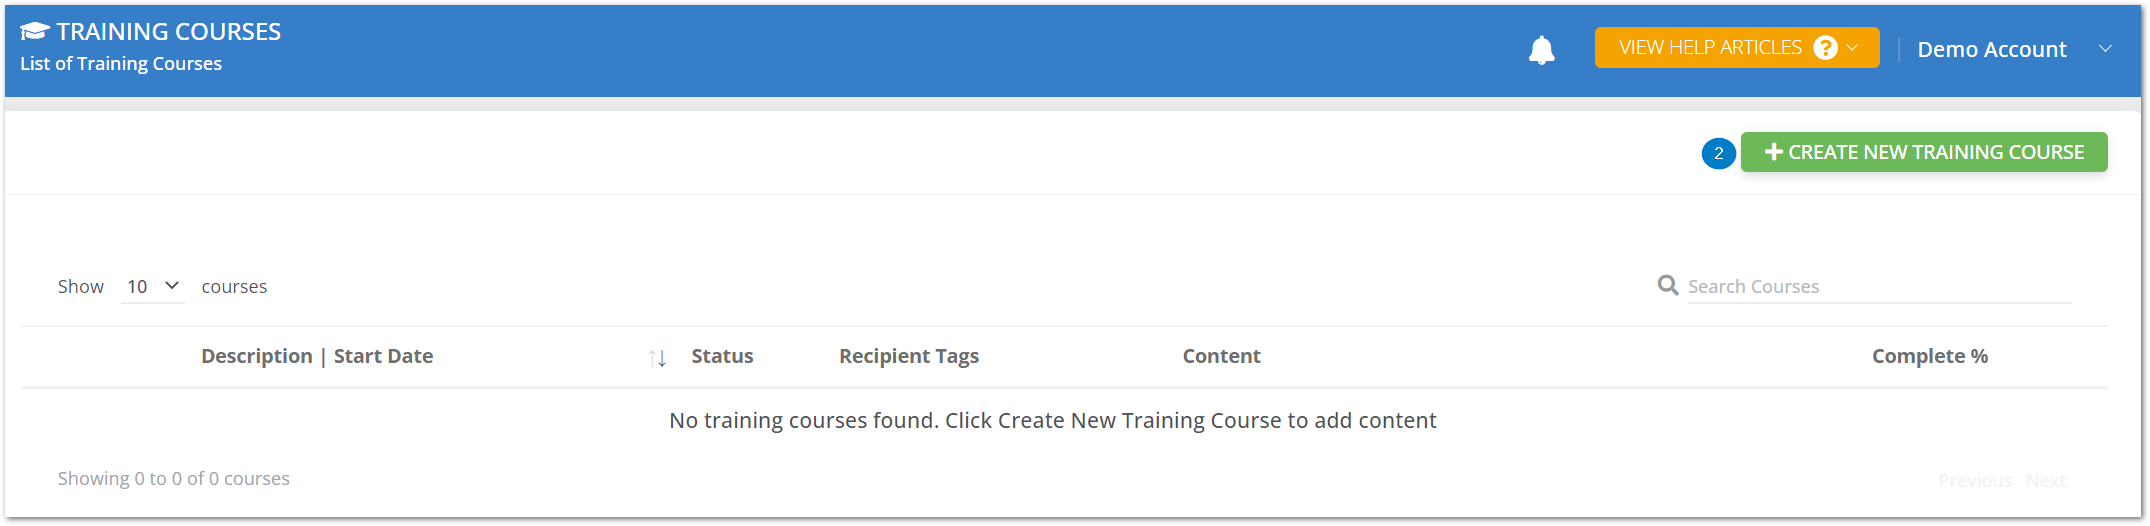 Training Course Automation - Create New Training Course.png